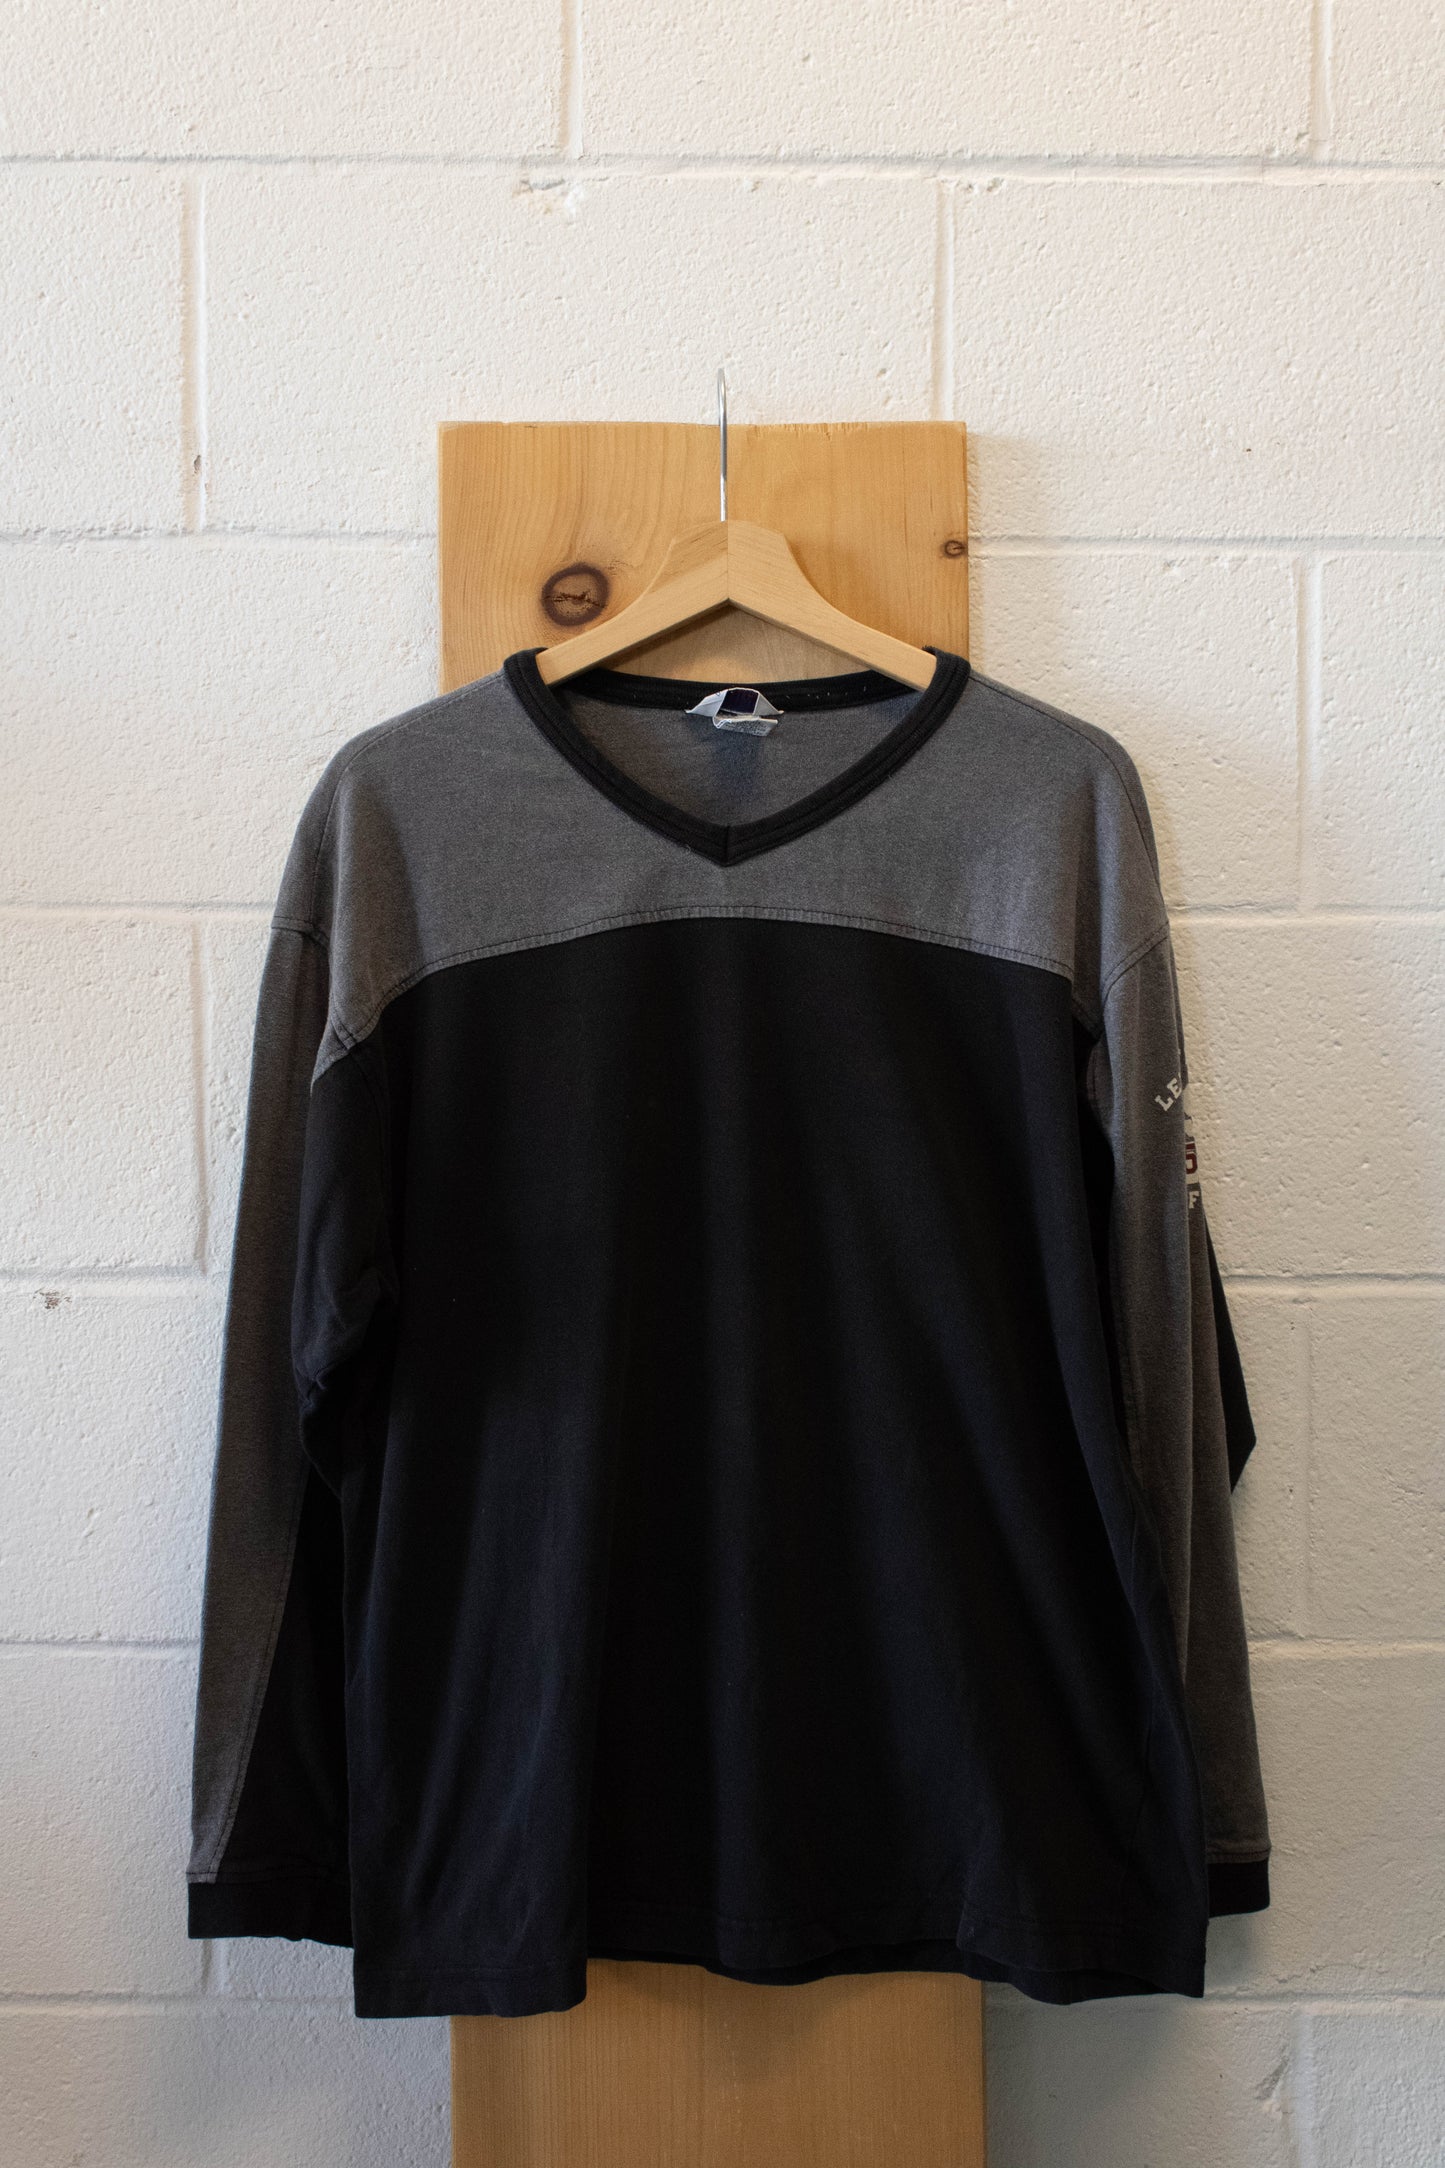 Levis Black and Grey Long Sleeve : XL